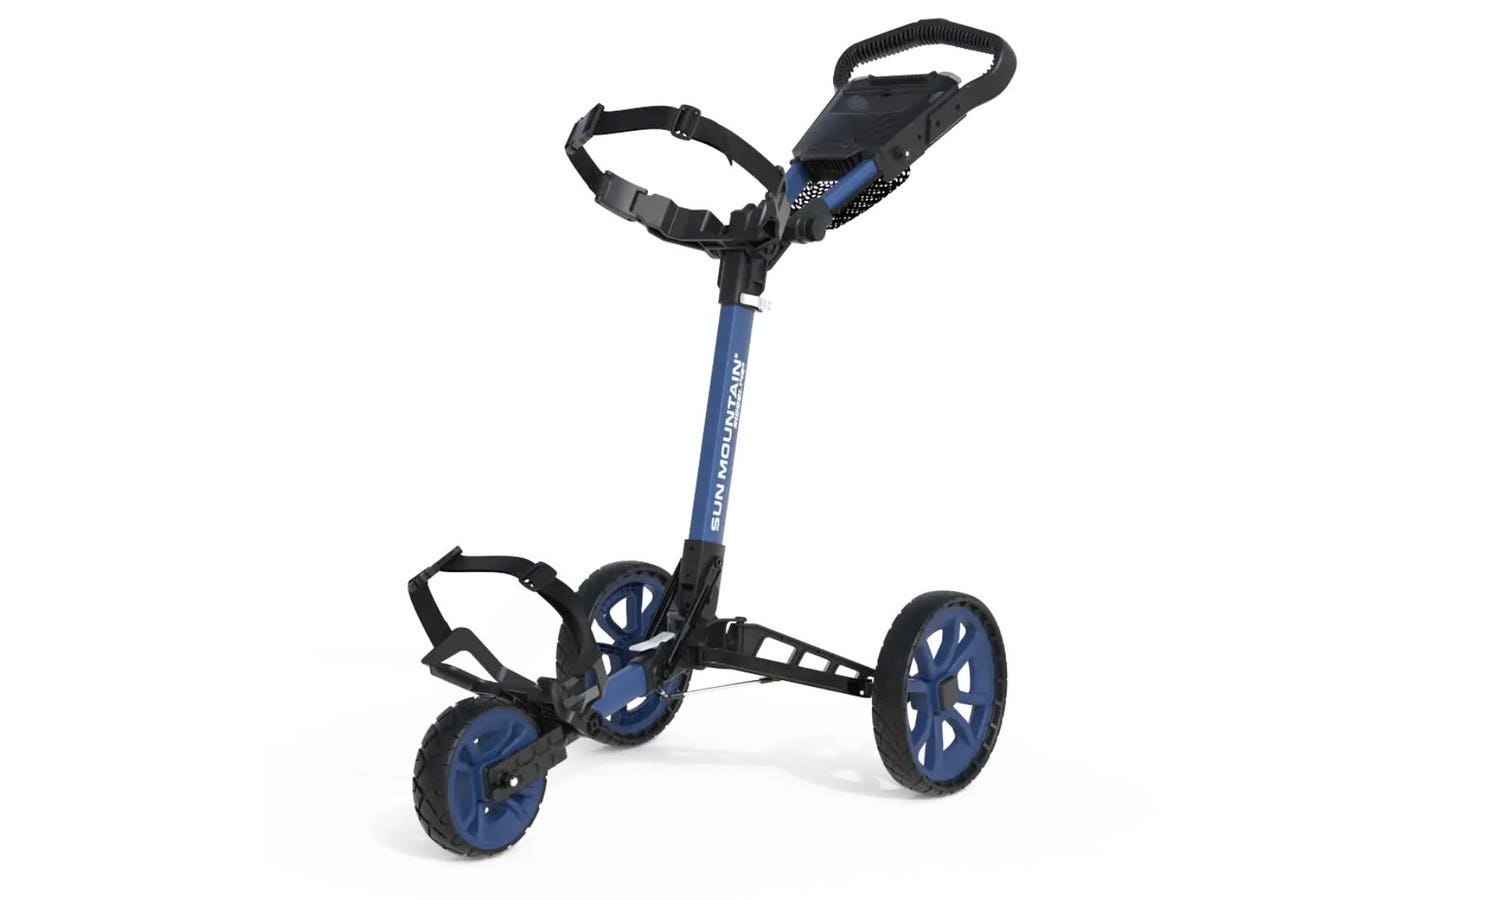 A Convenient Push Cart To Help You Walk The Course